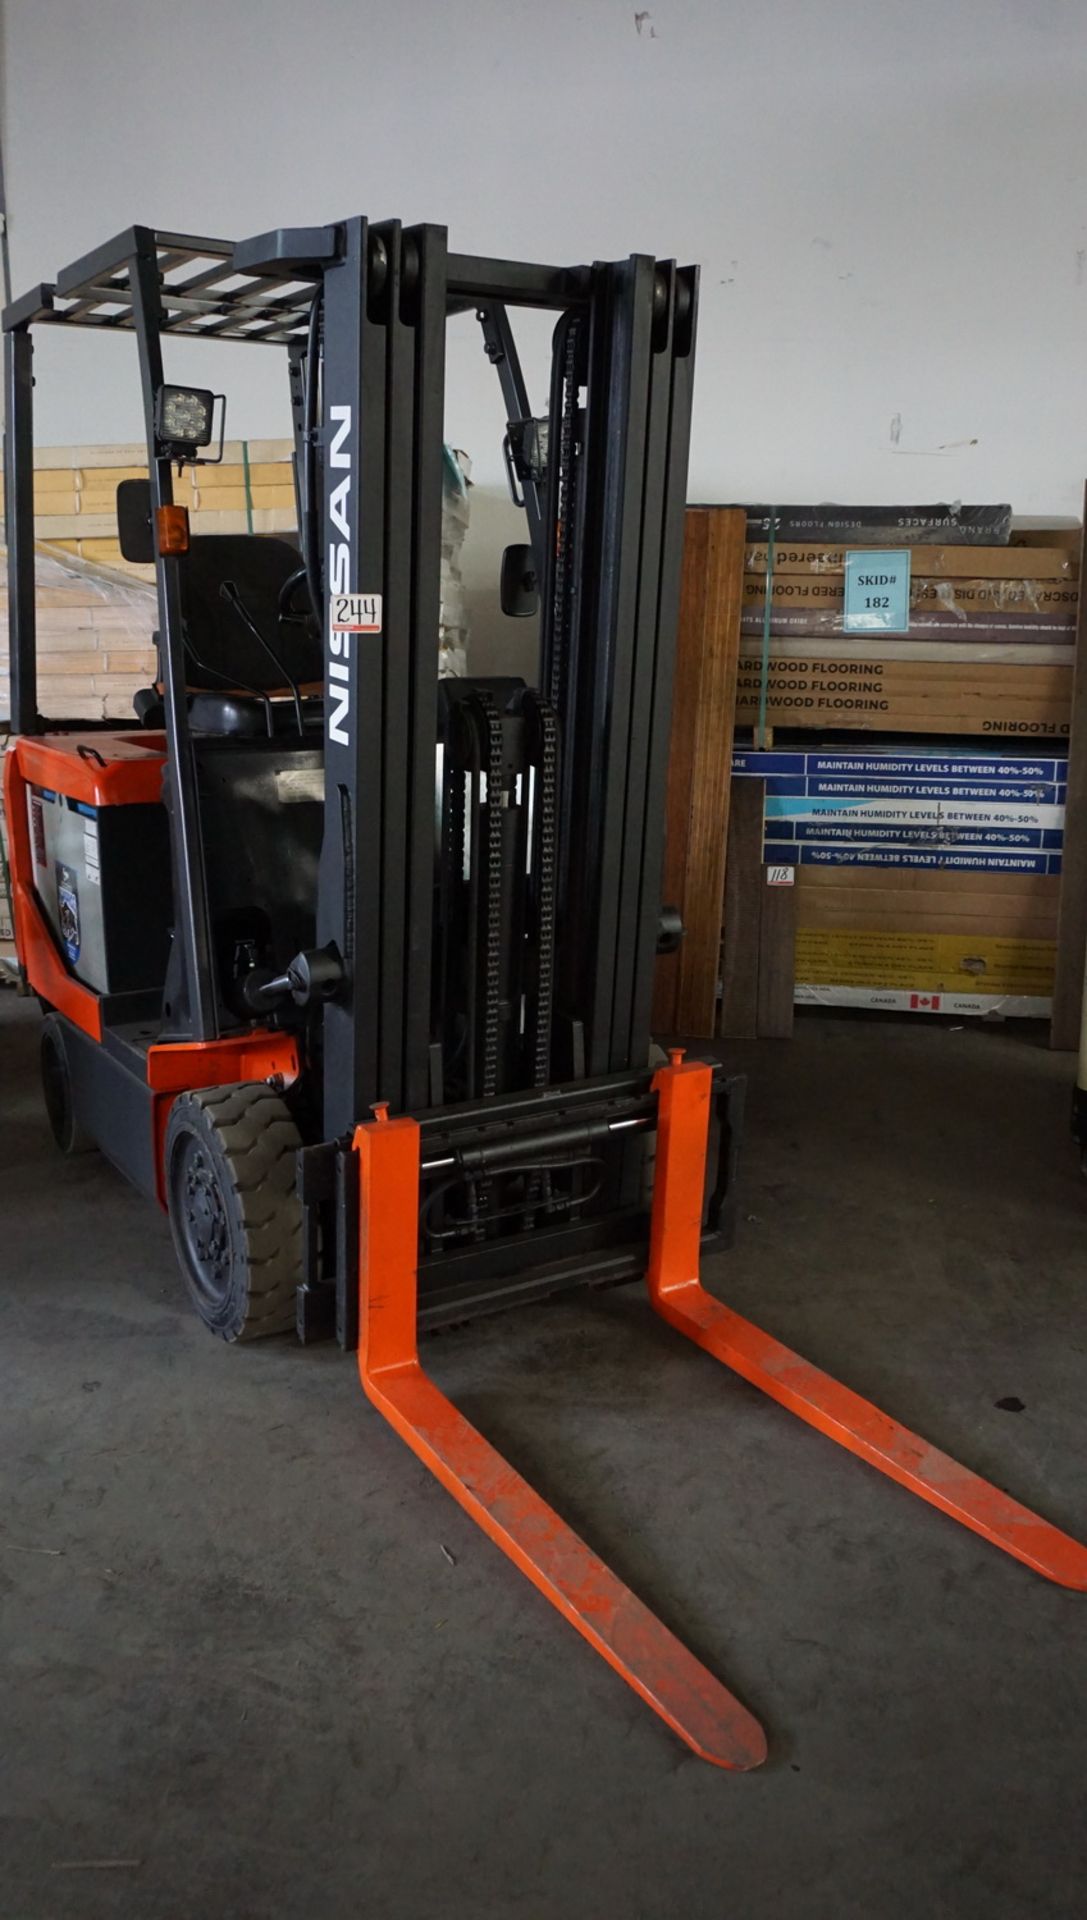 NISSAN CP1B2L25BS ELECTRIC 5,000LBS CAP FORKLIFT W/ 187" LIFT, 3-STAGE MAST, SIDE SHIFT, S/N CP1B2-